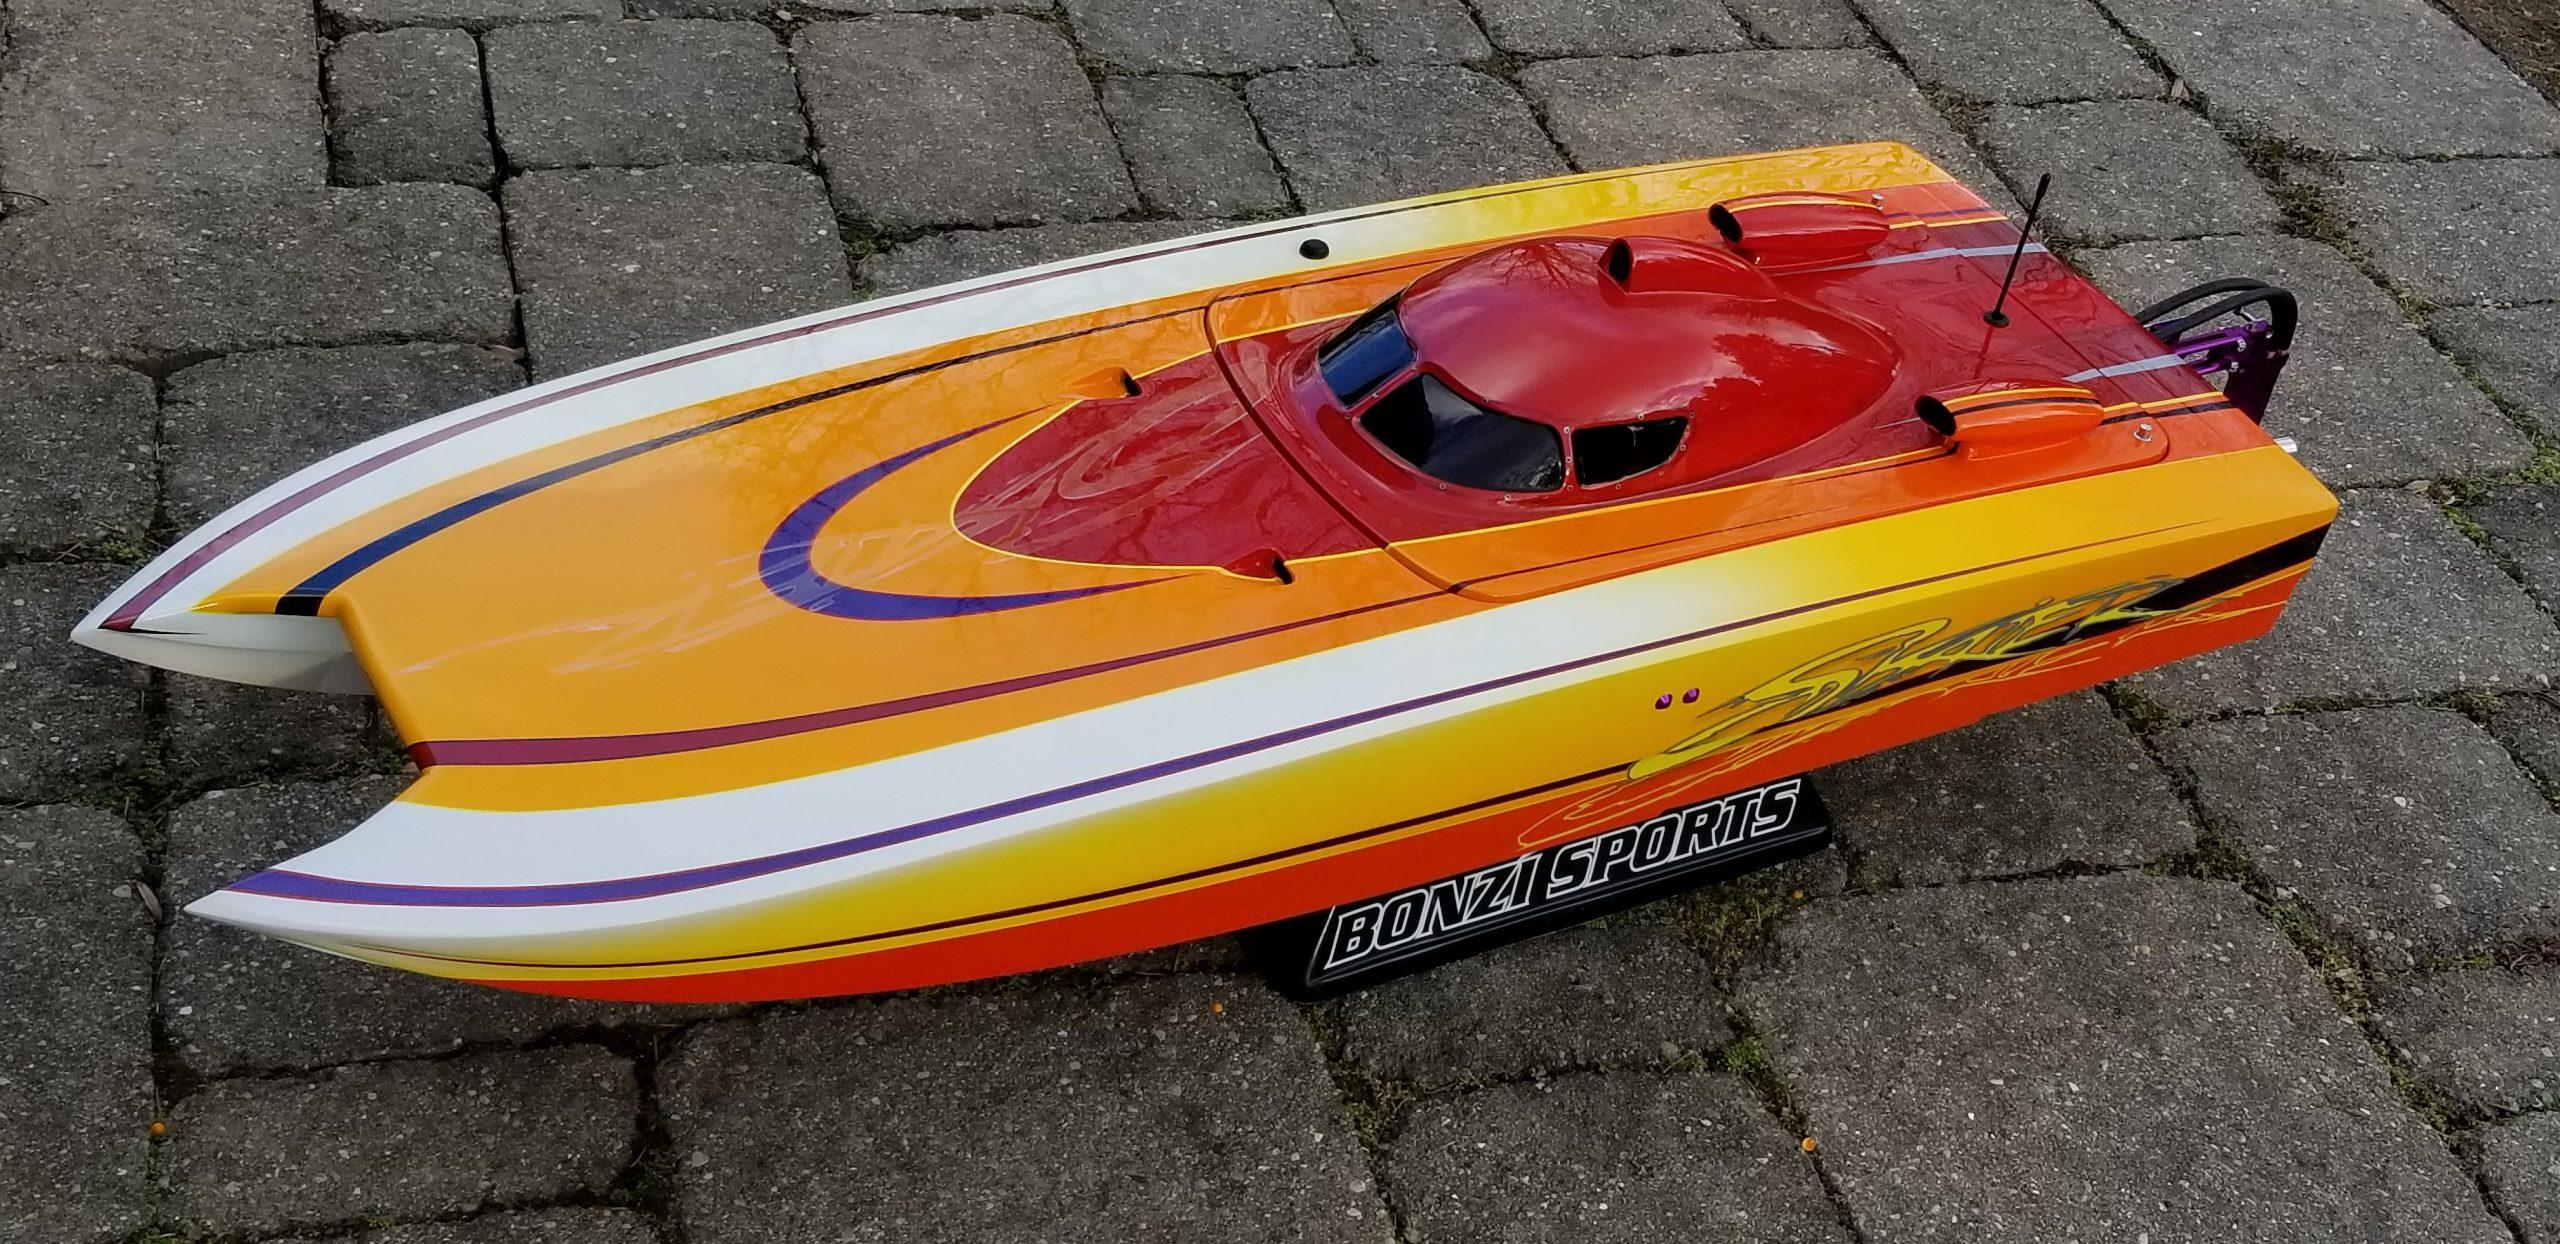 Used Bonzi Rc Boats For Sale: Tips for Finding the Right Used Bonzi RC Boat